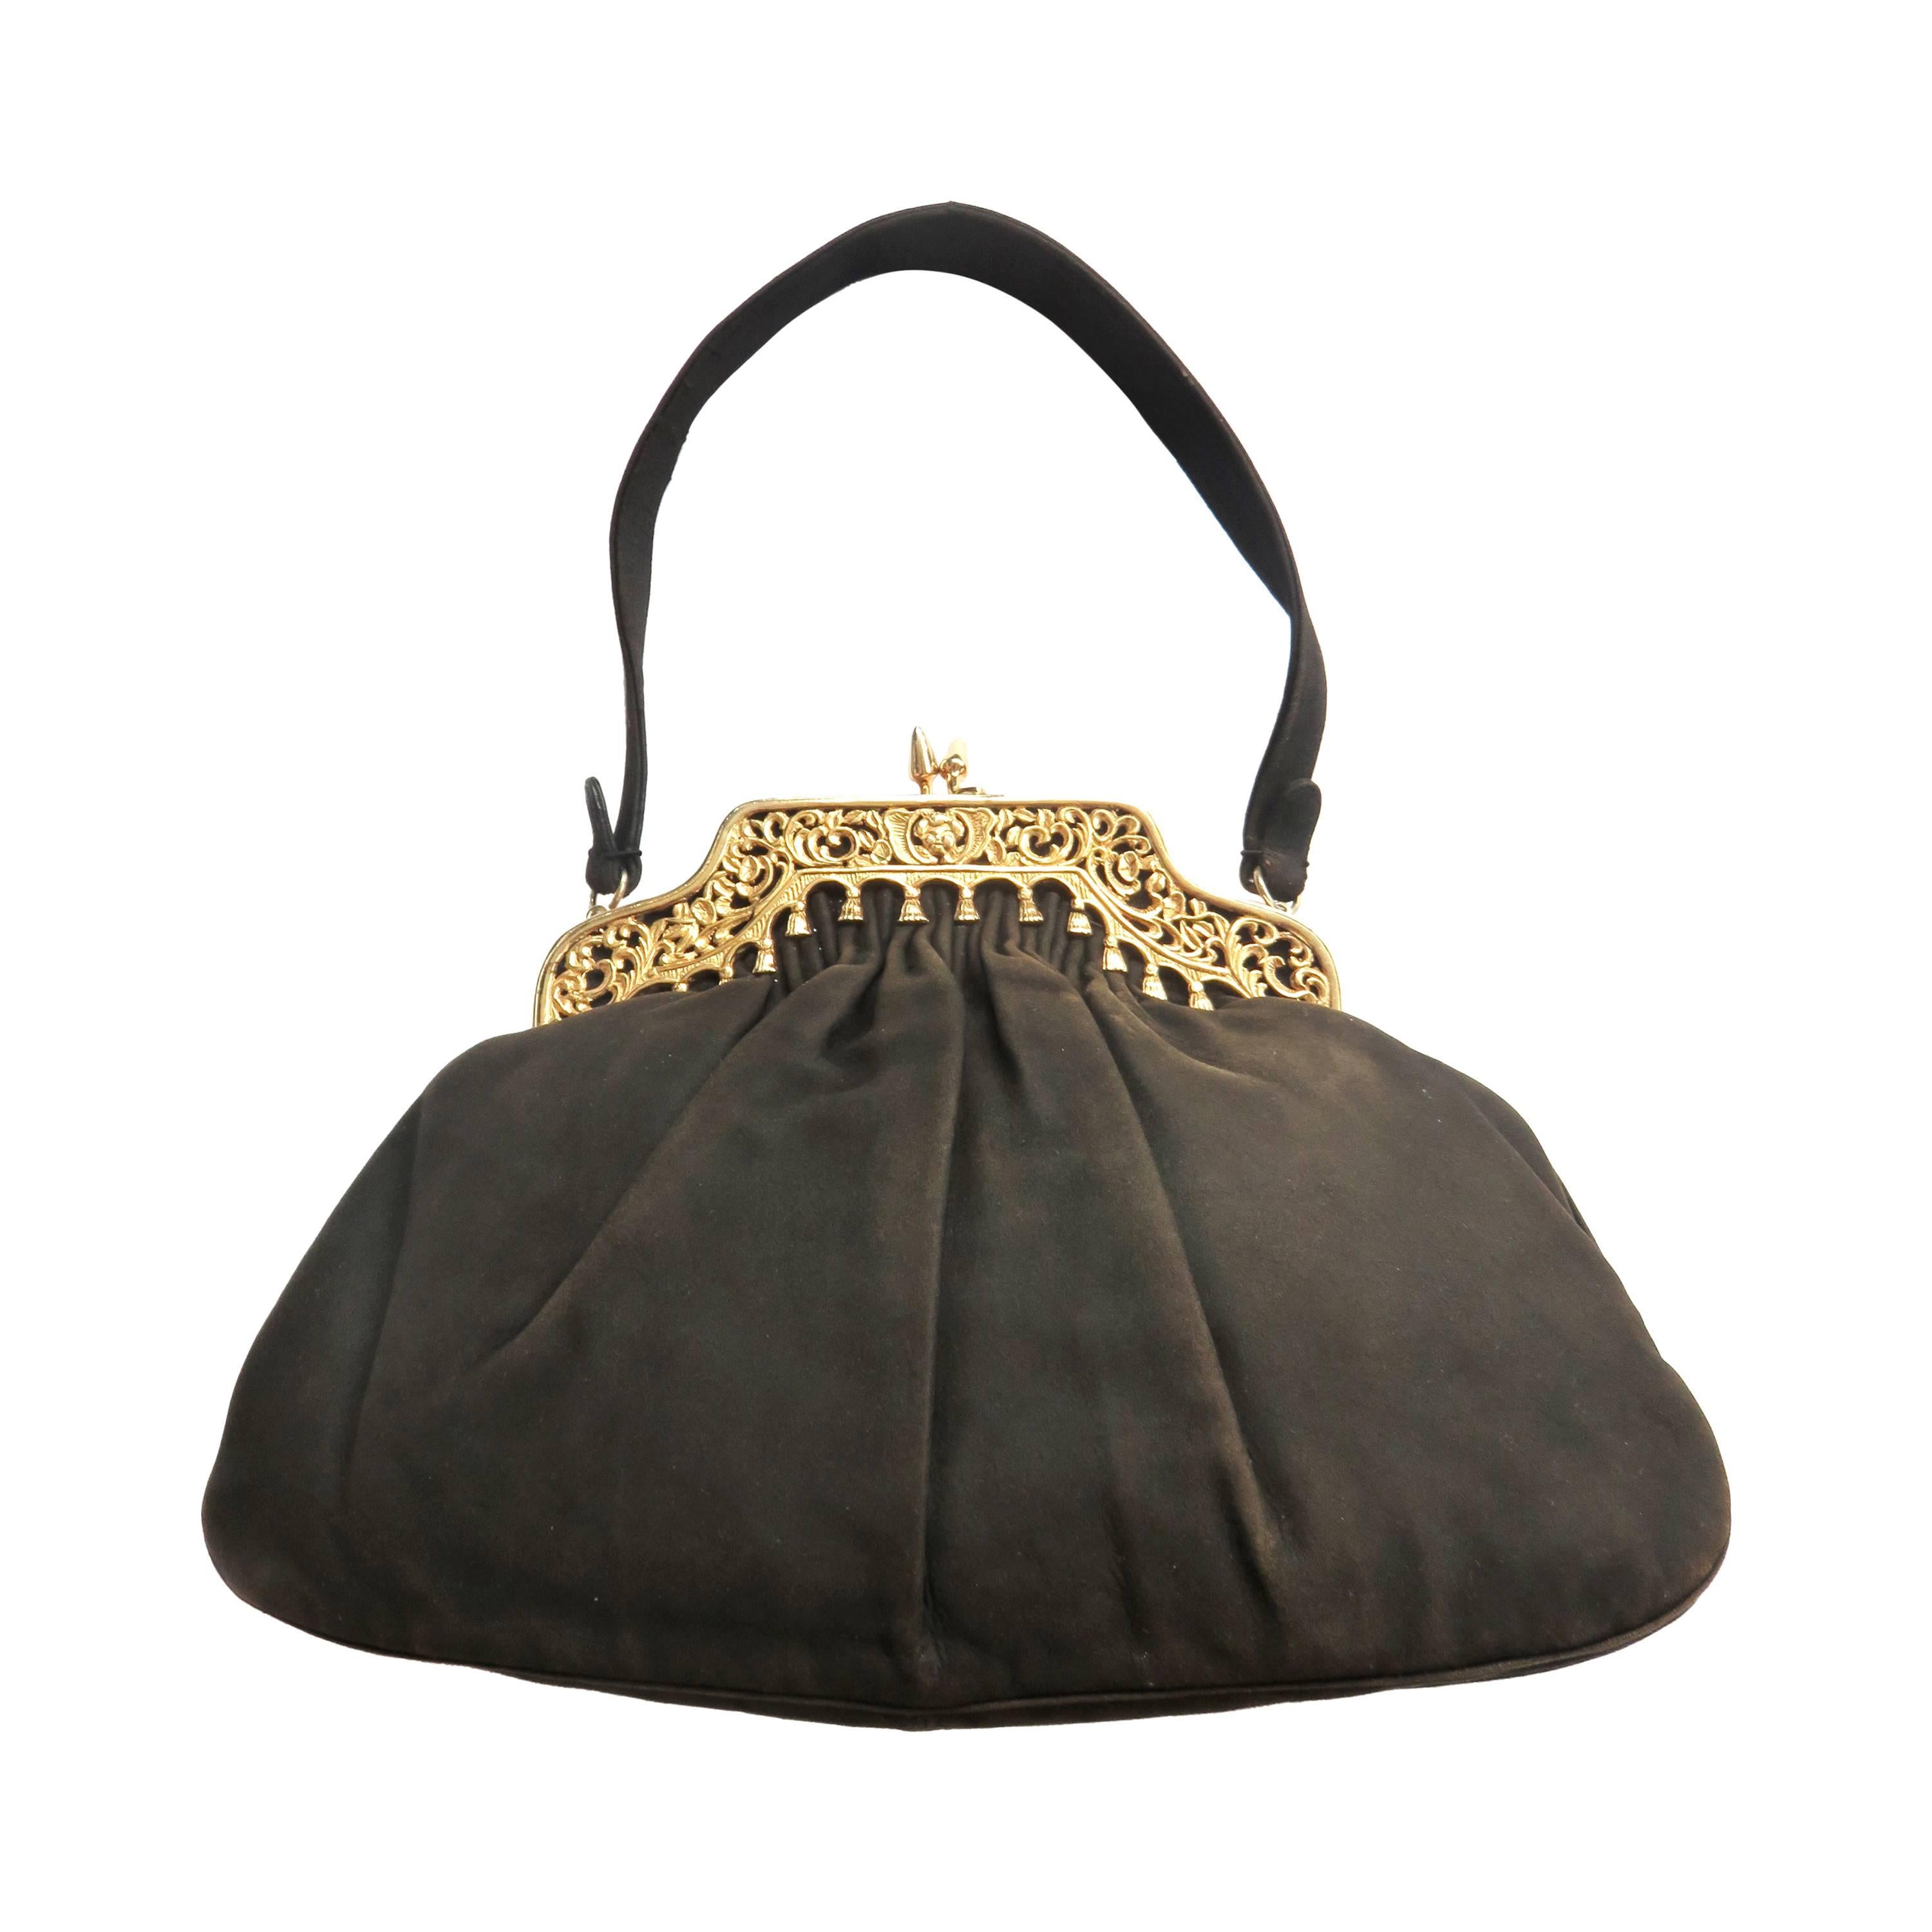 1940's NETTIE ROSENSTEIN Brown suede and metal evening bag purse For Sale